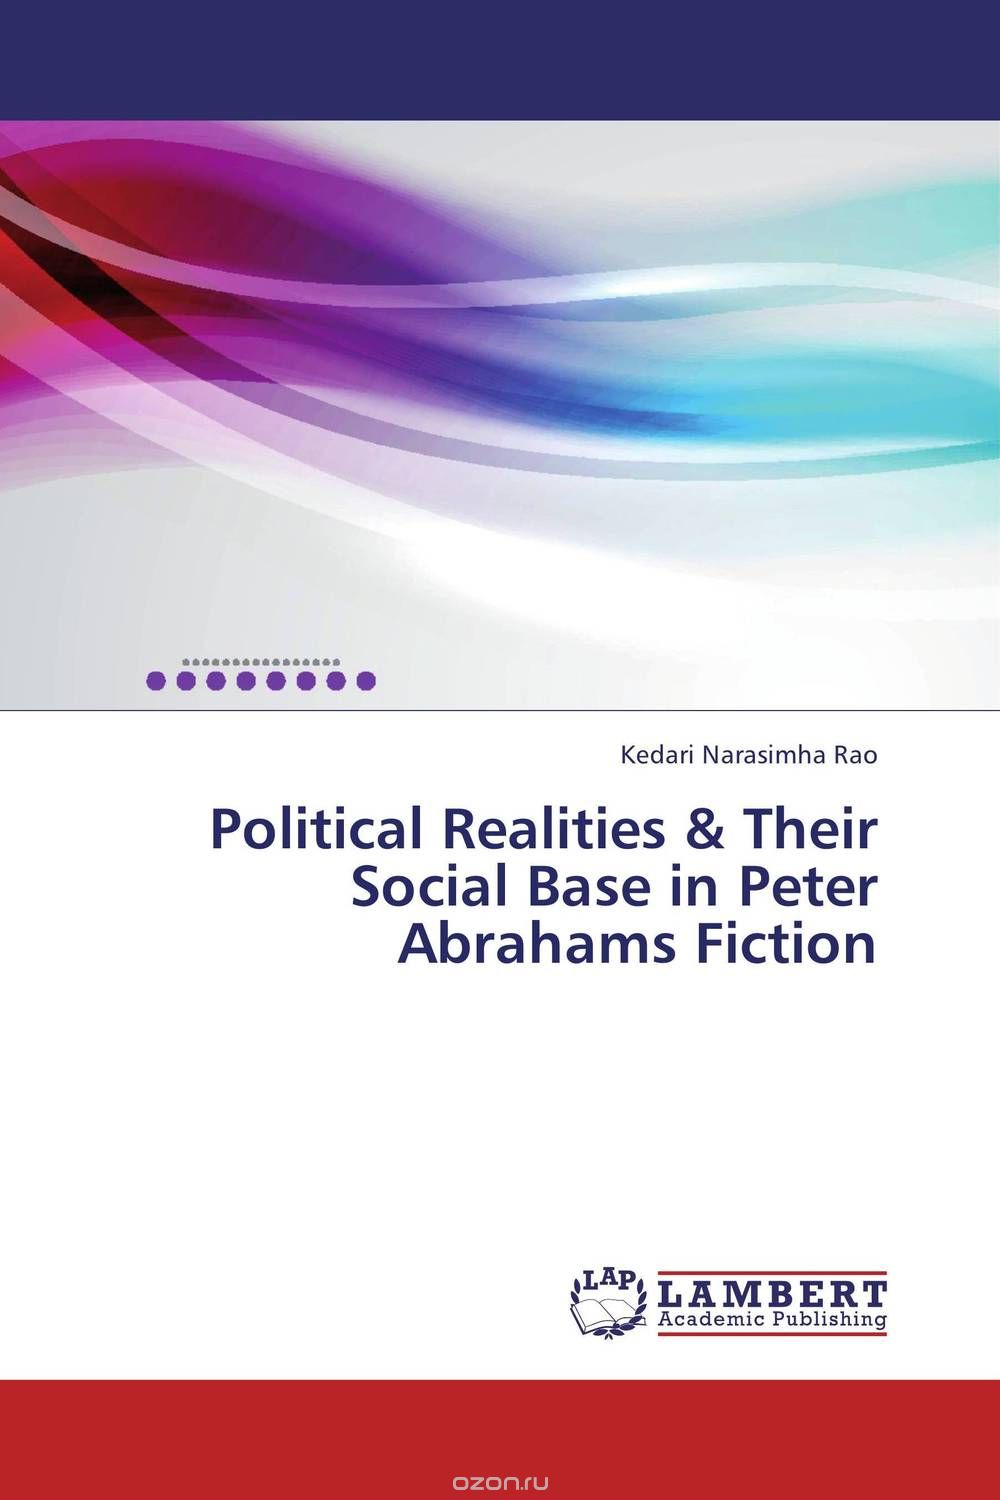 Political Realities & Their Social Base in Peter Abrahams Fiction